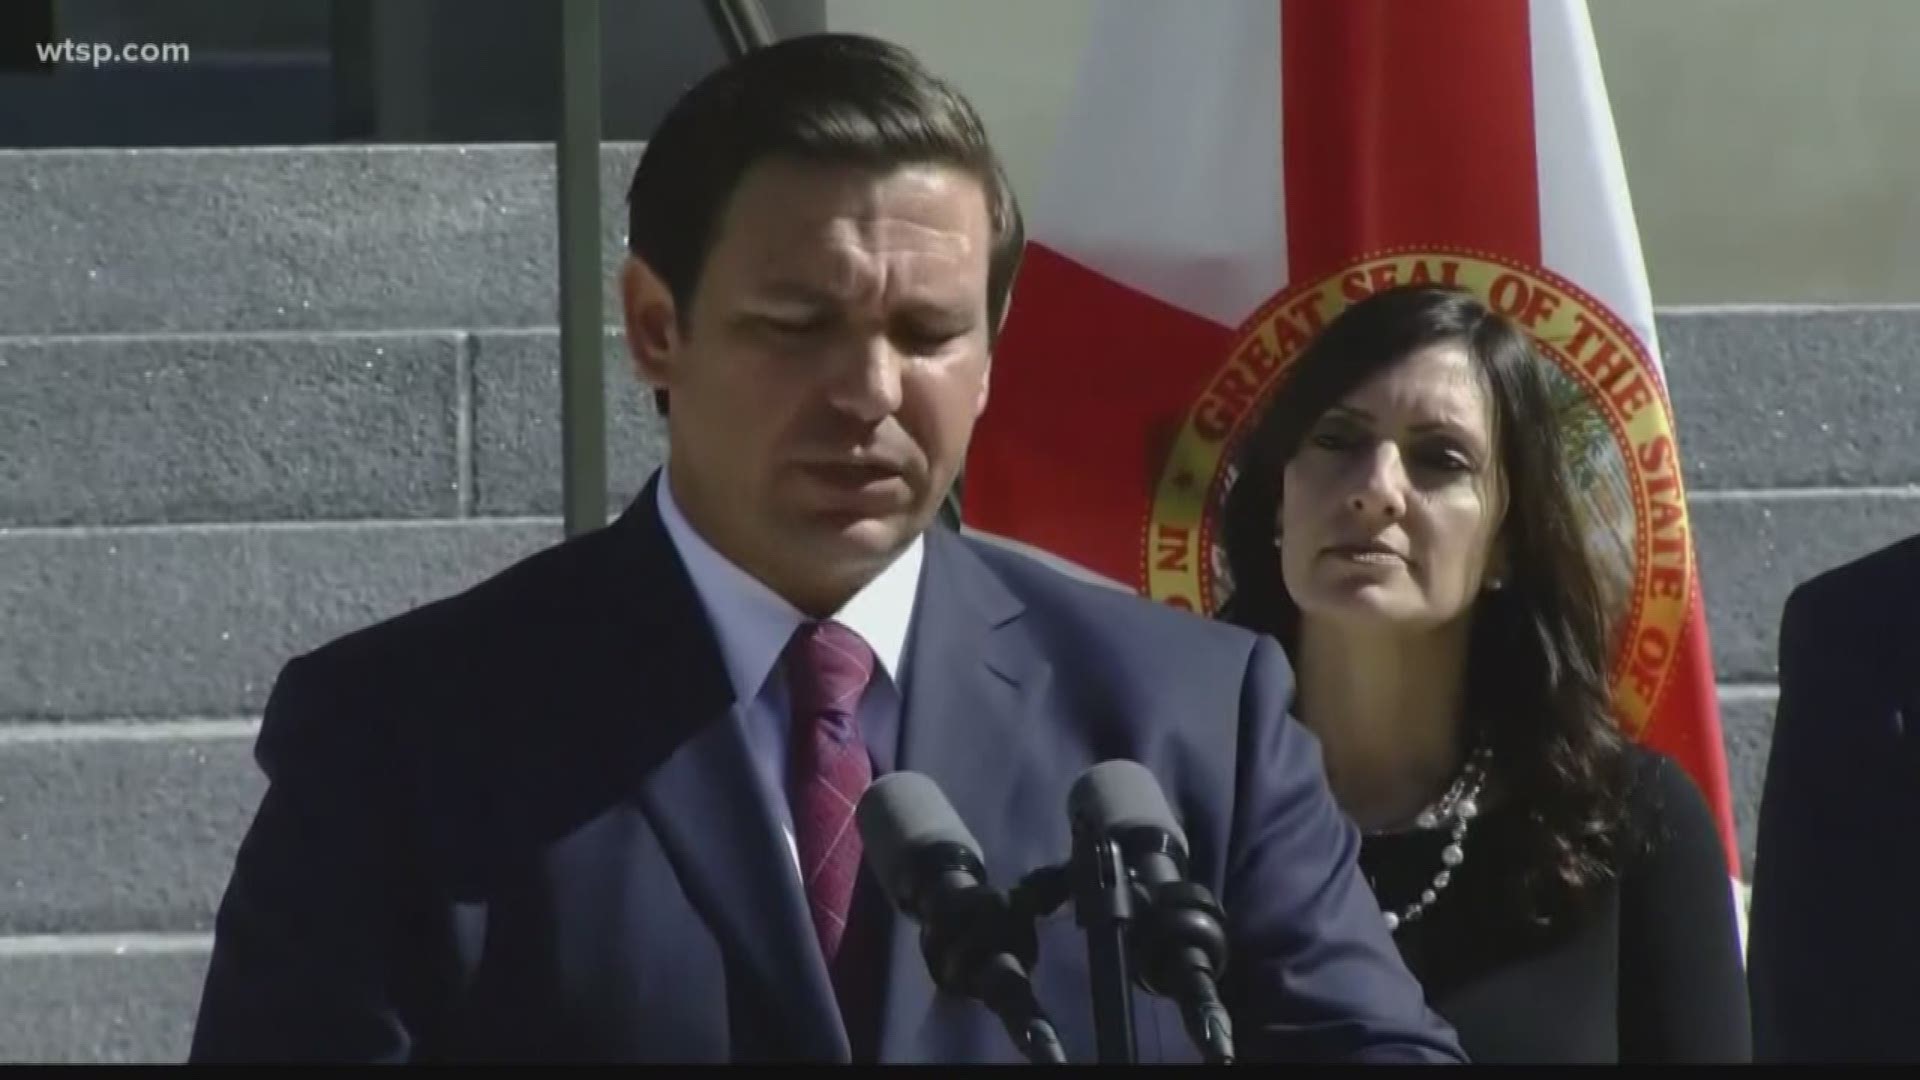 Florida Gov. Ron DeSantis announced Wednesday he filed a petition with the state Supreme Court for a grand jury to review school safety measures.